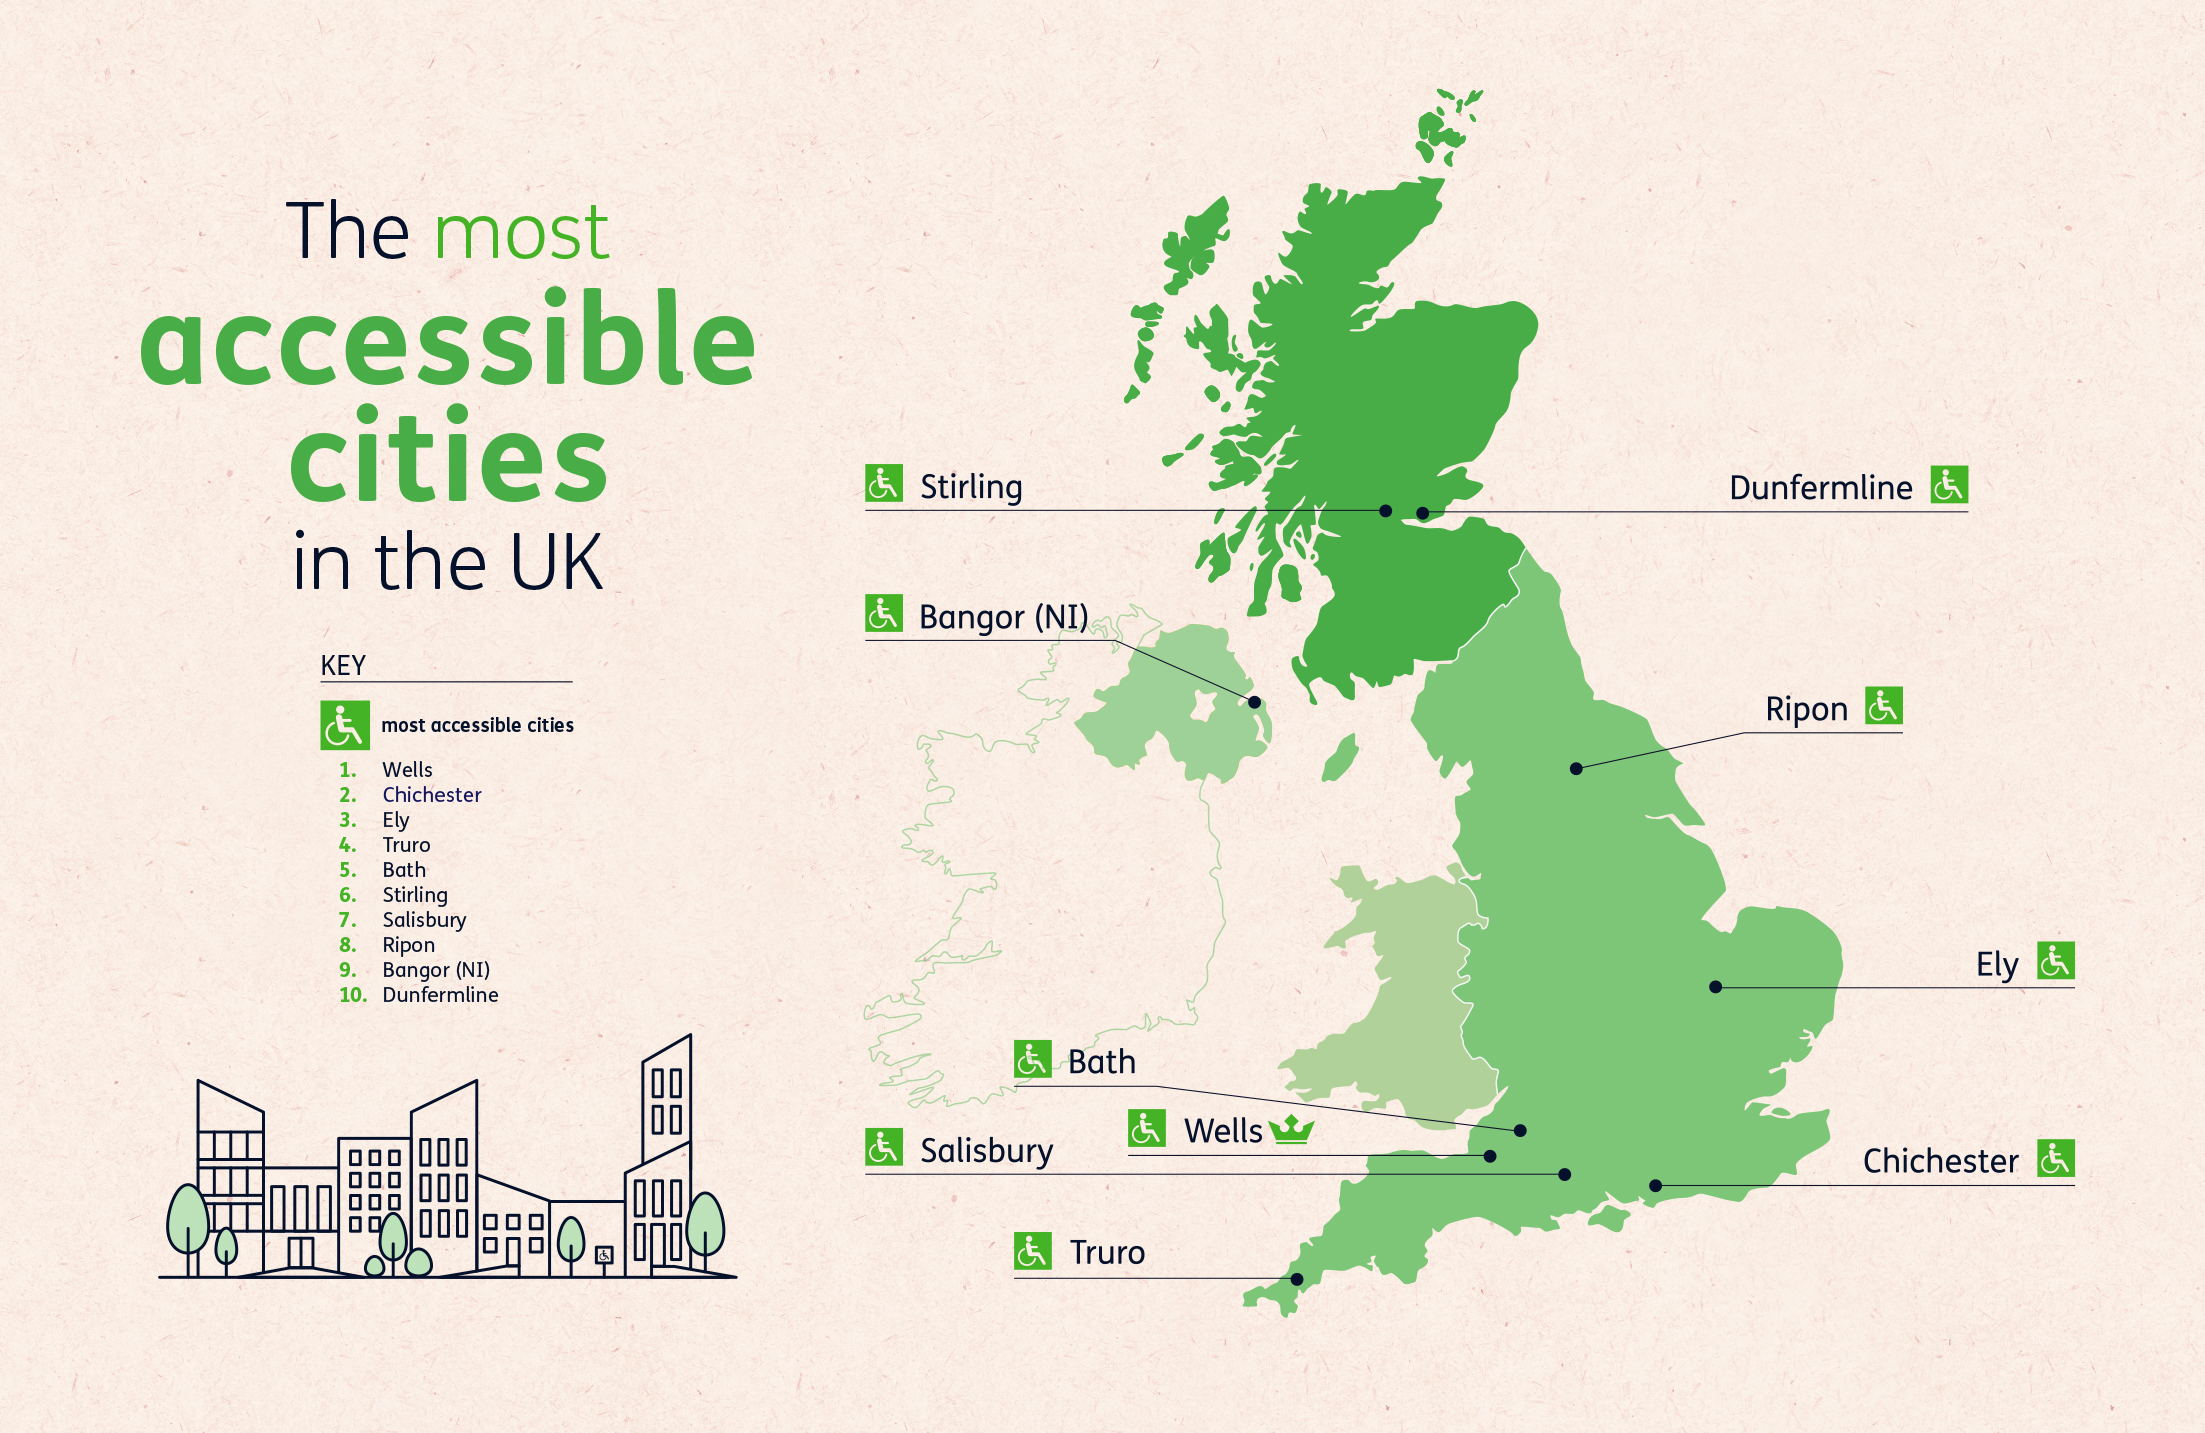 The most accessible cities in the UK